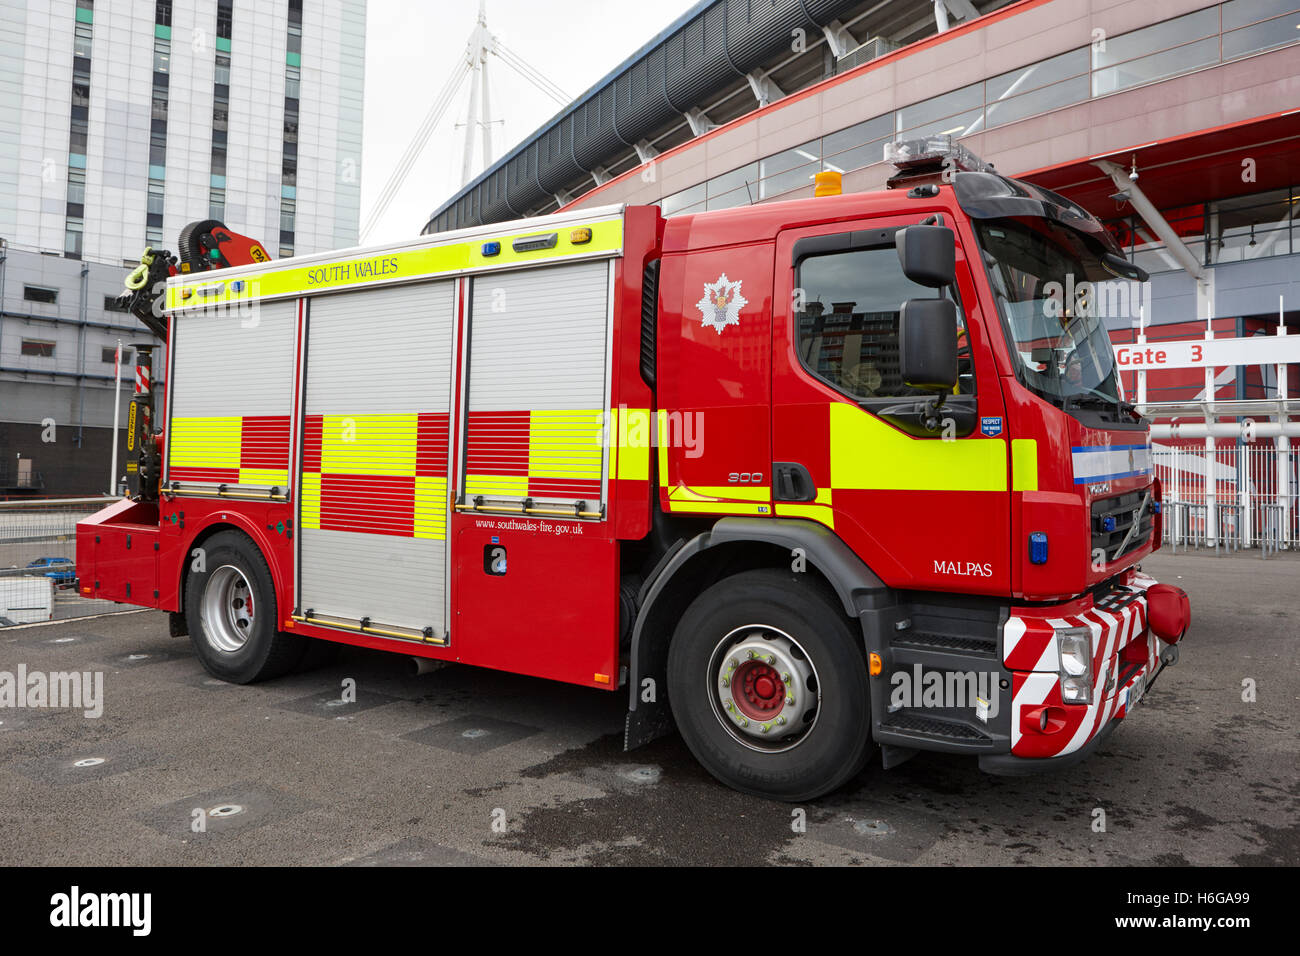 south wales fire service rescue tender from malpas station Cardiff Wales United Kingdom Stock Photo